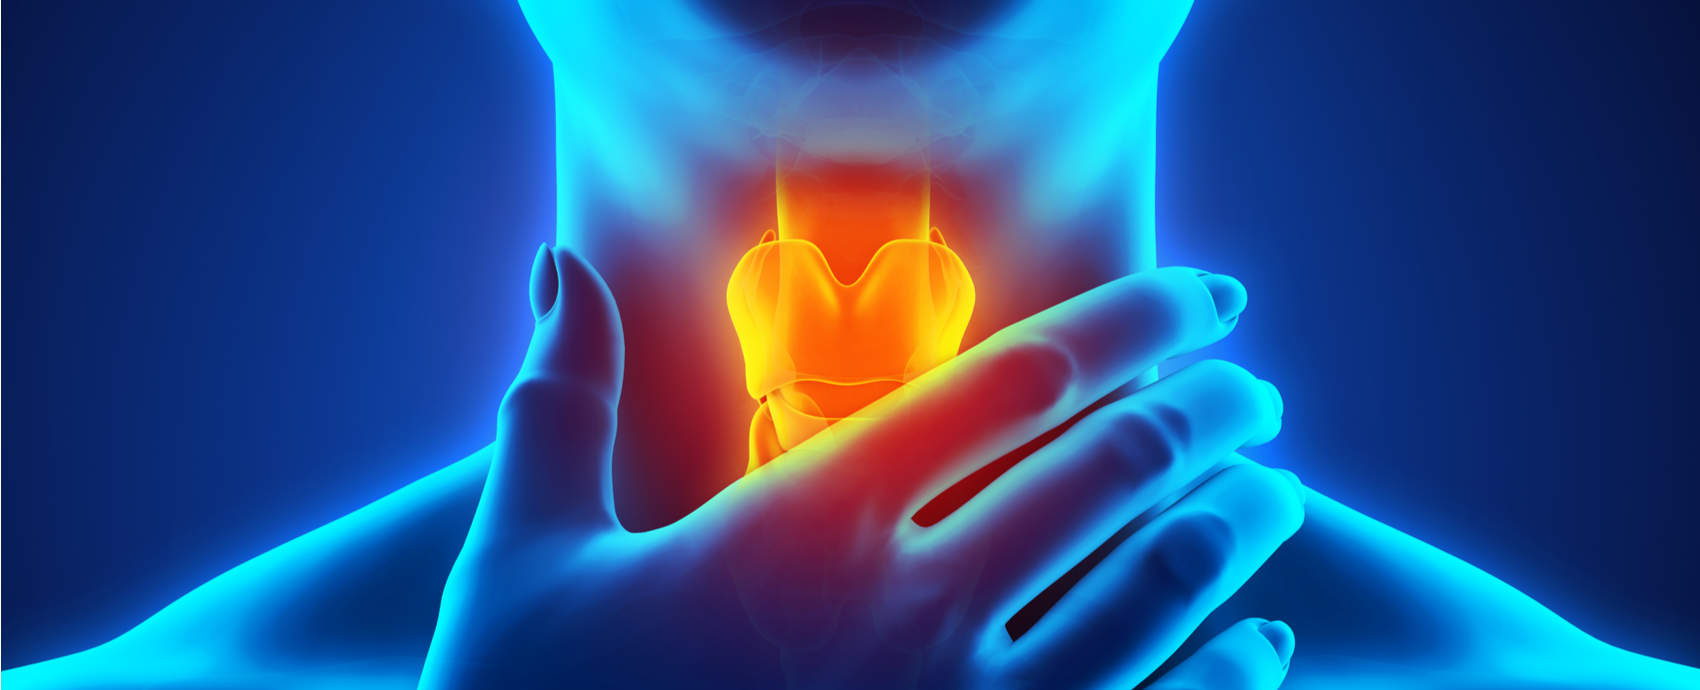 Persistent sore throat ‘can be a cancer sign’ according to research